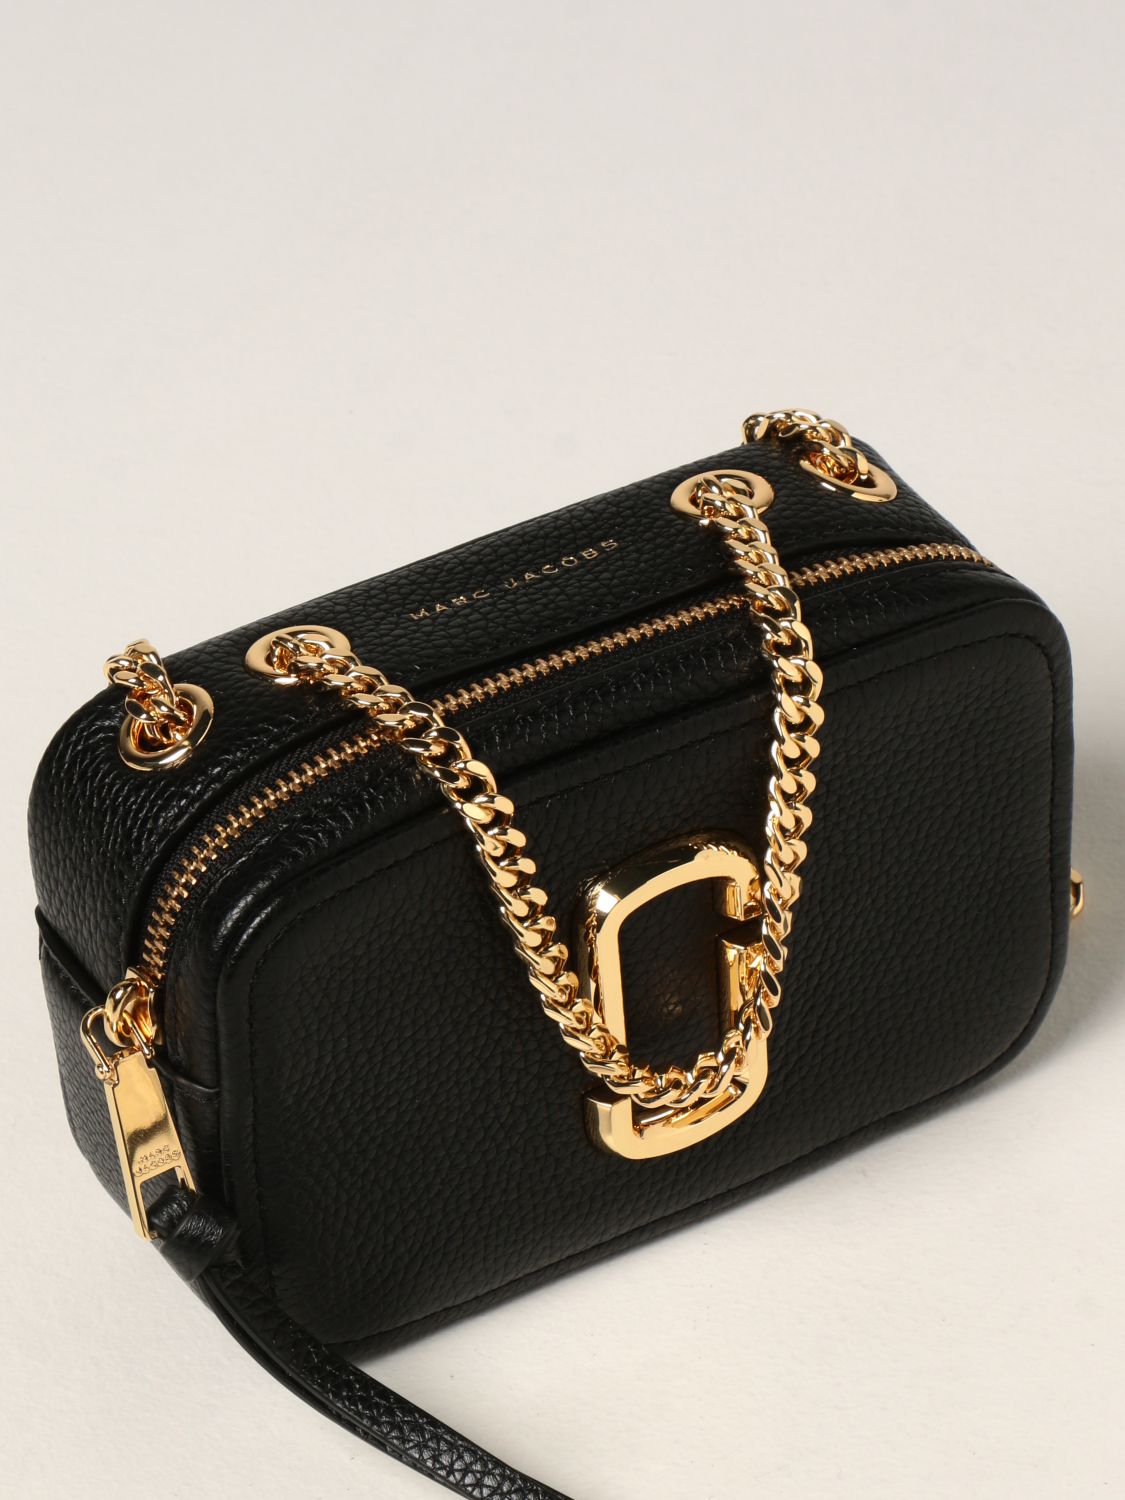 Marc Jacobs The Softshot 17 Black Leather Cross-Body Bag